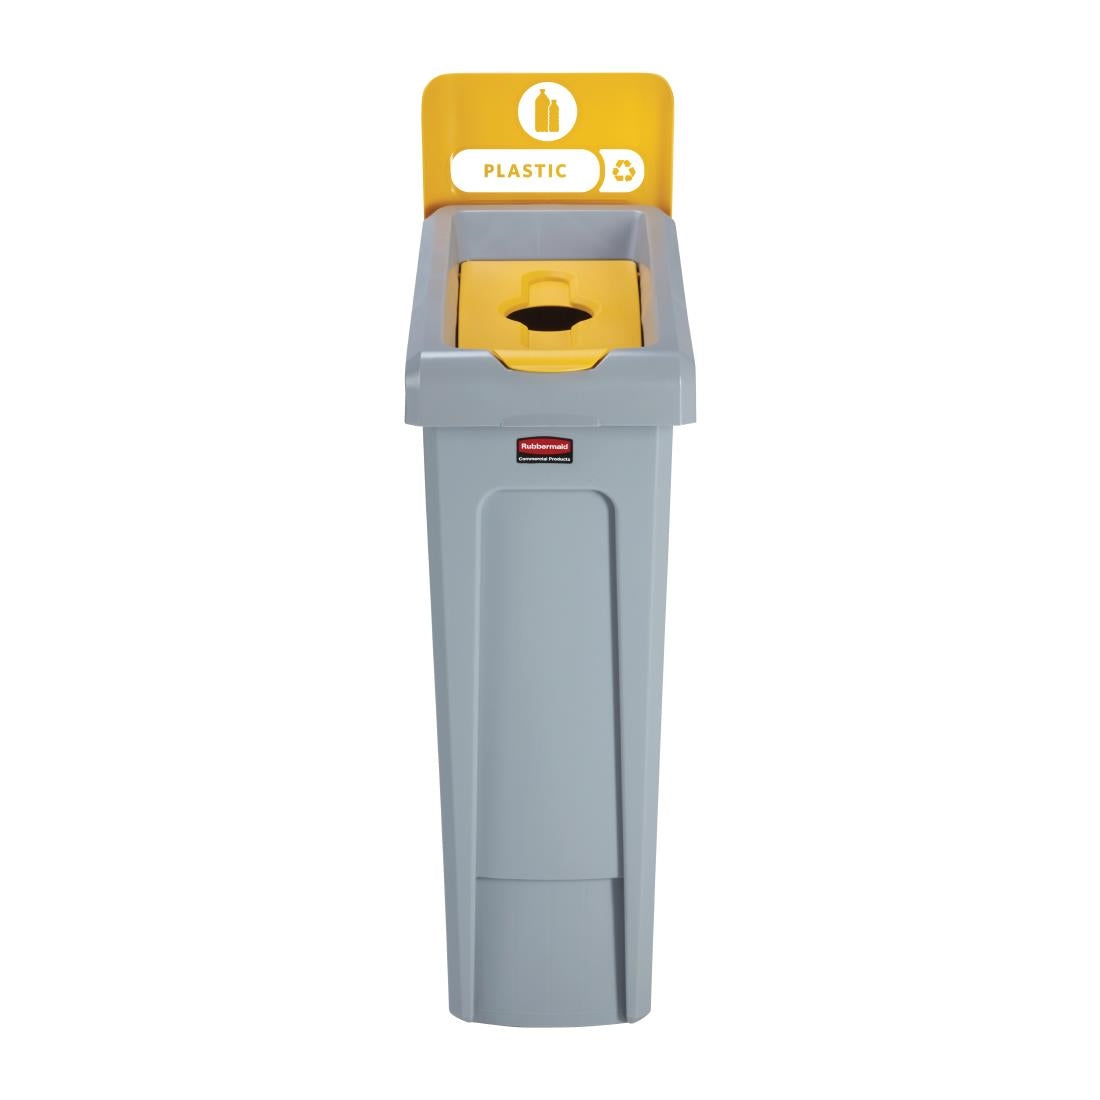 DY085 Rubbermaid Slim Jim Plastic Recycling Station Yellow 87Ltr